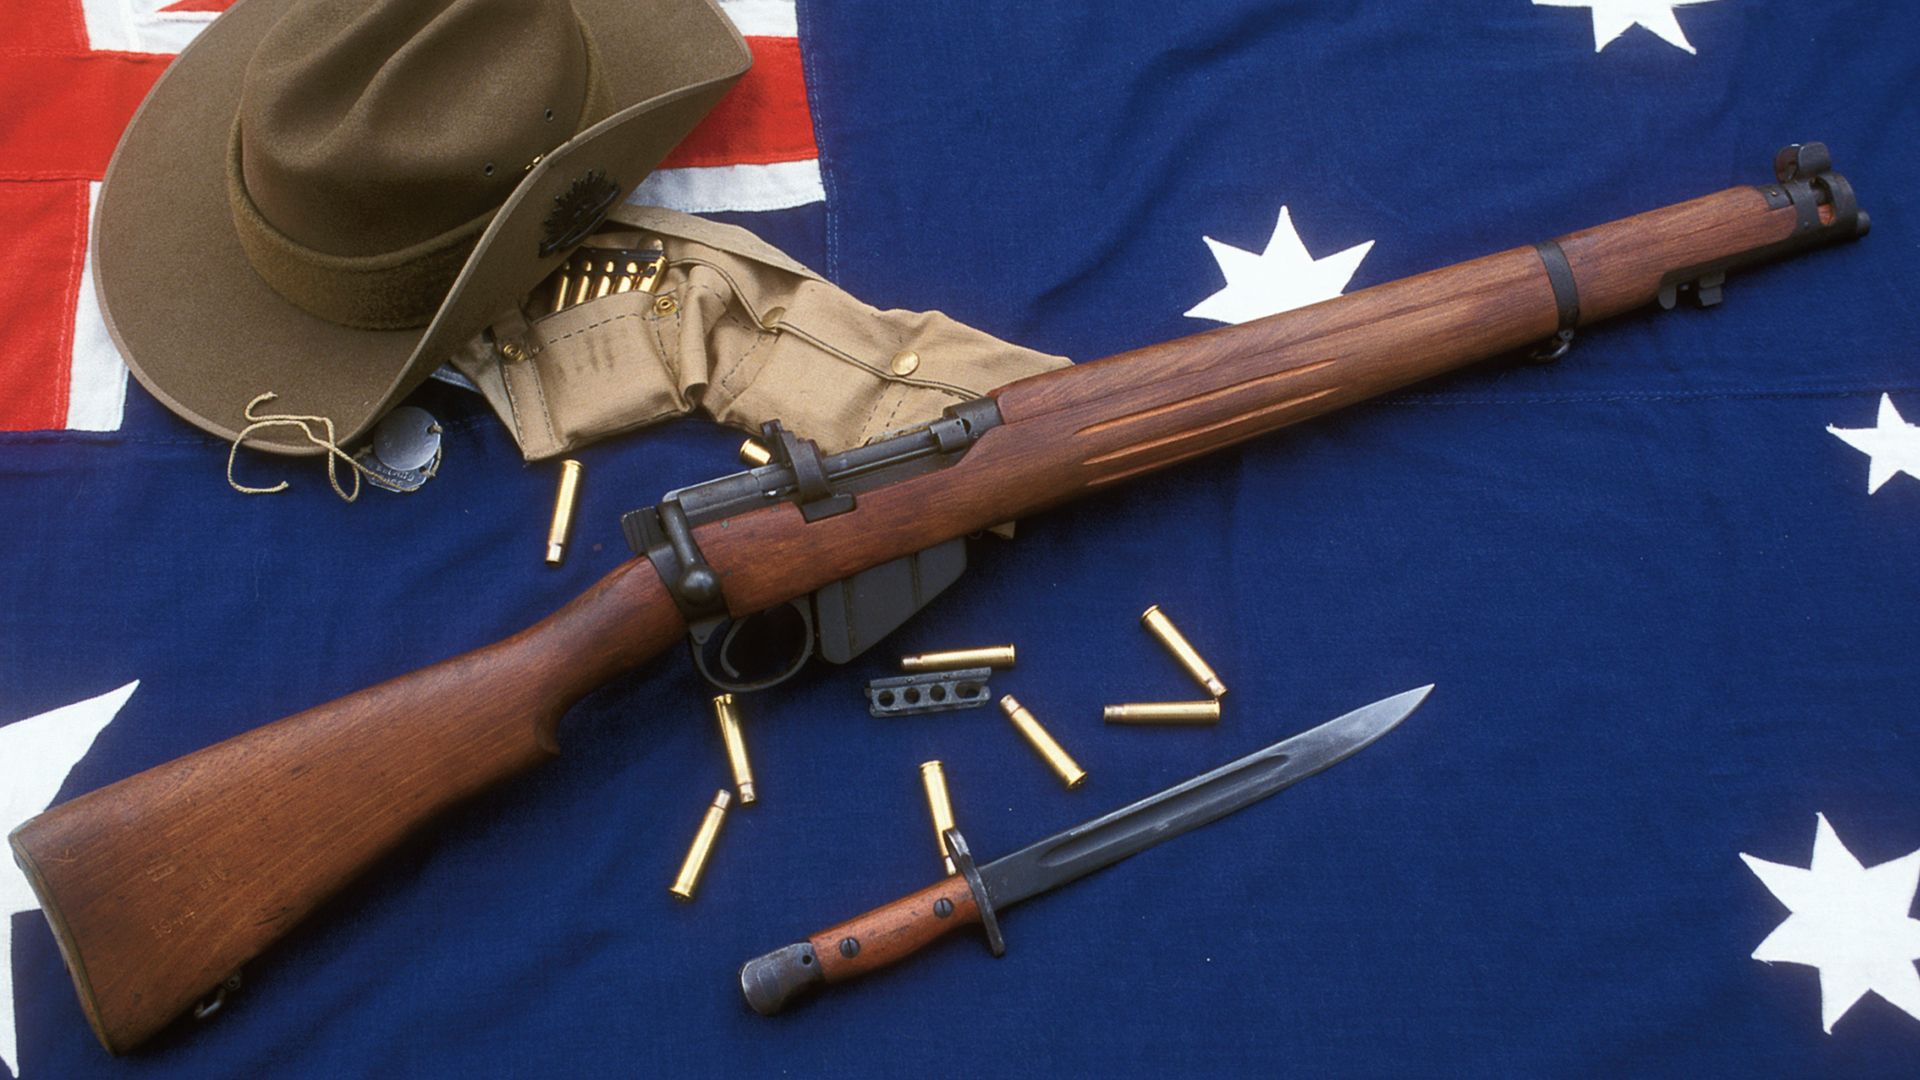 The Lee Enfield Rifle